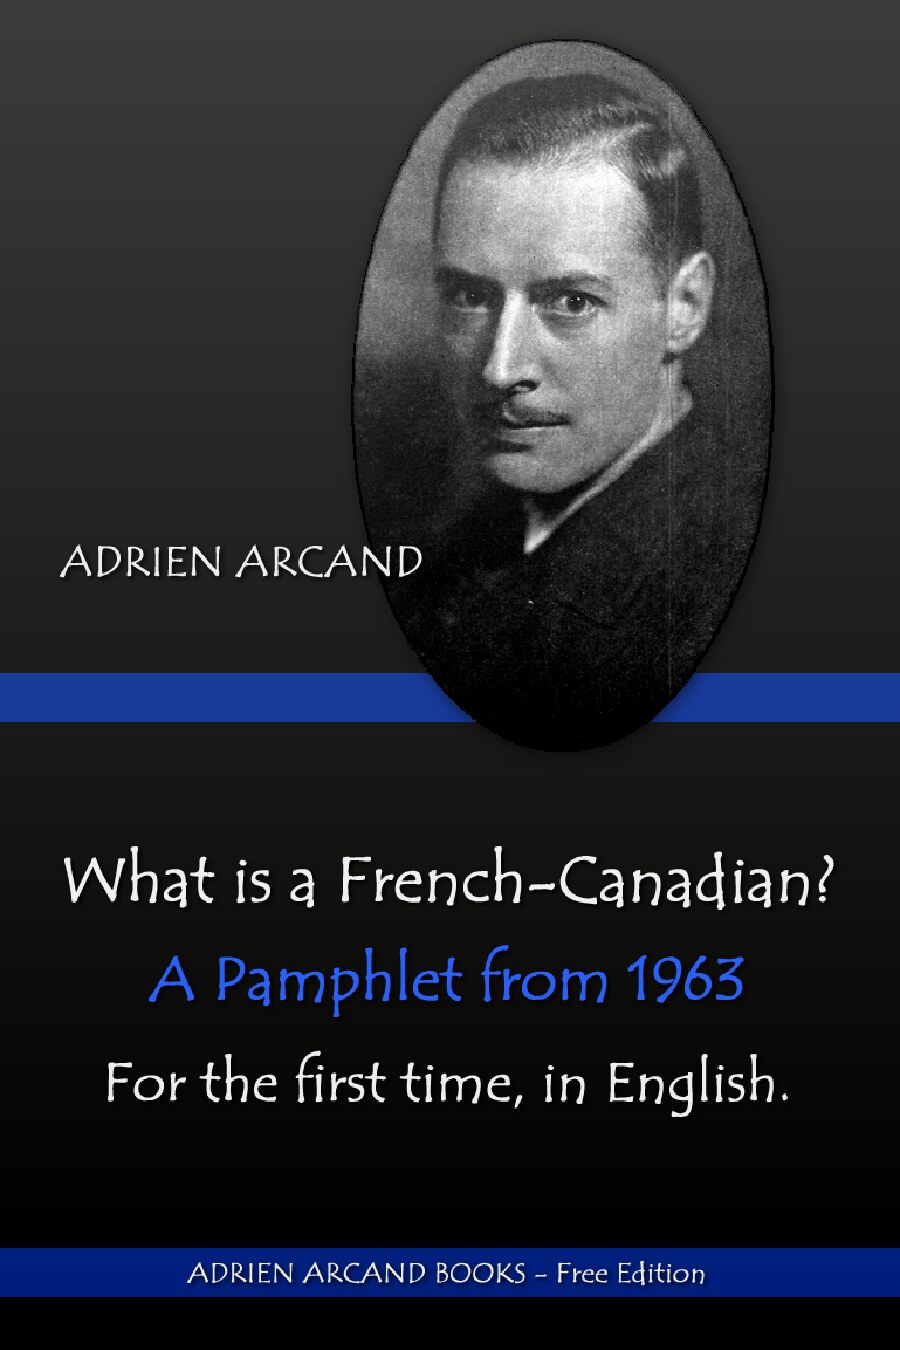 What is a French-Canadian